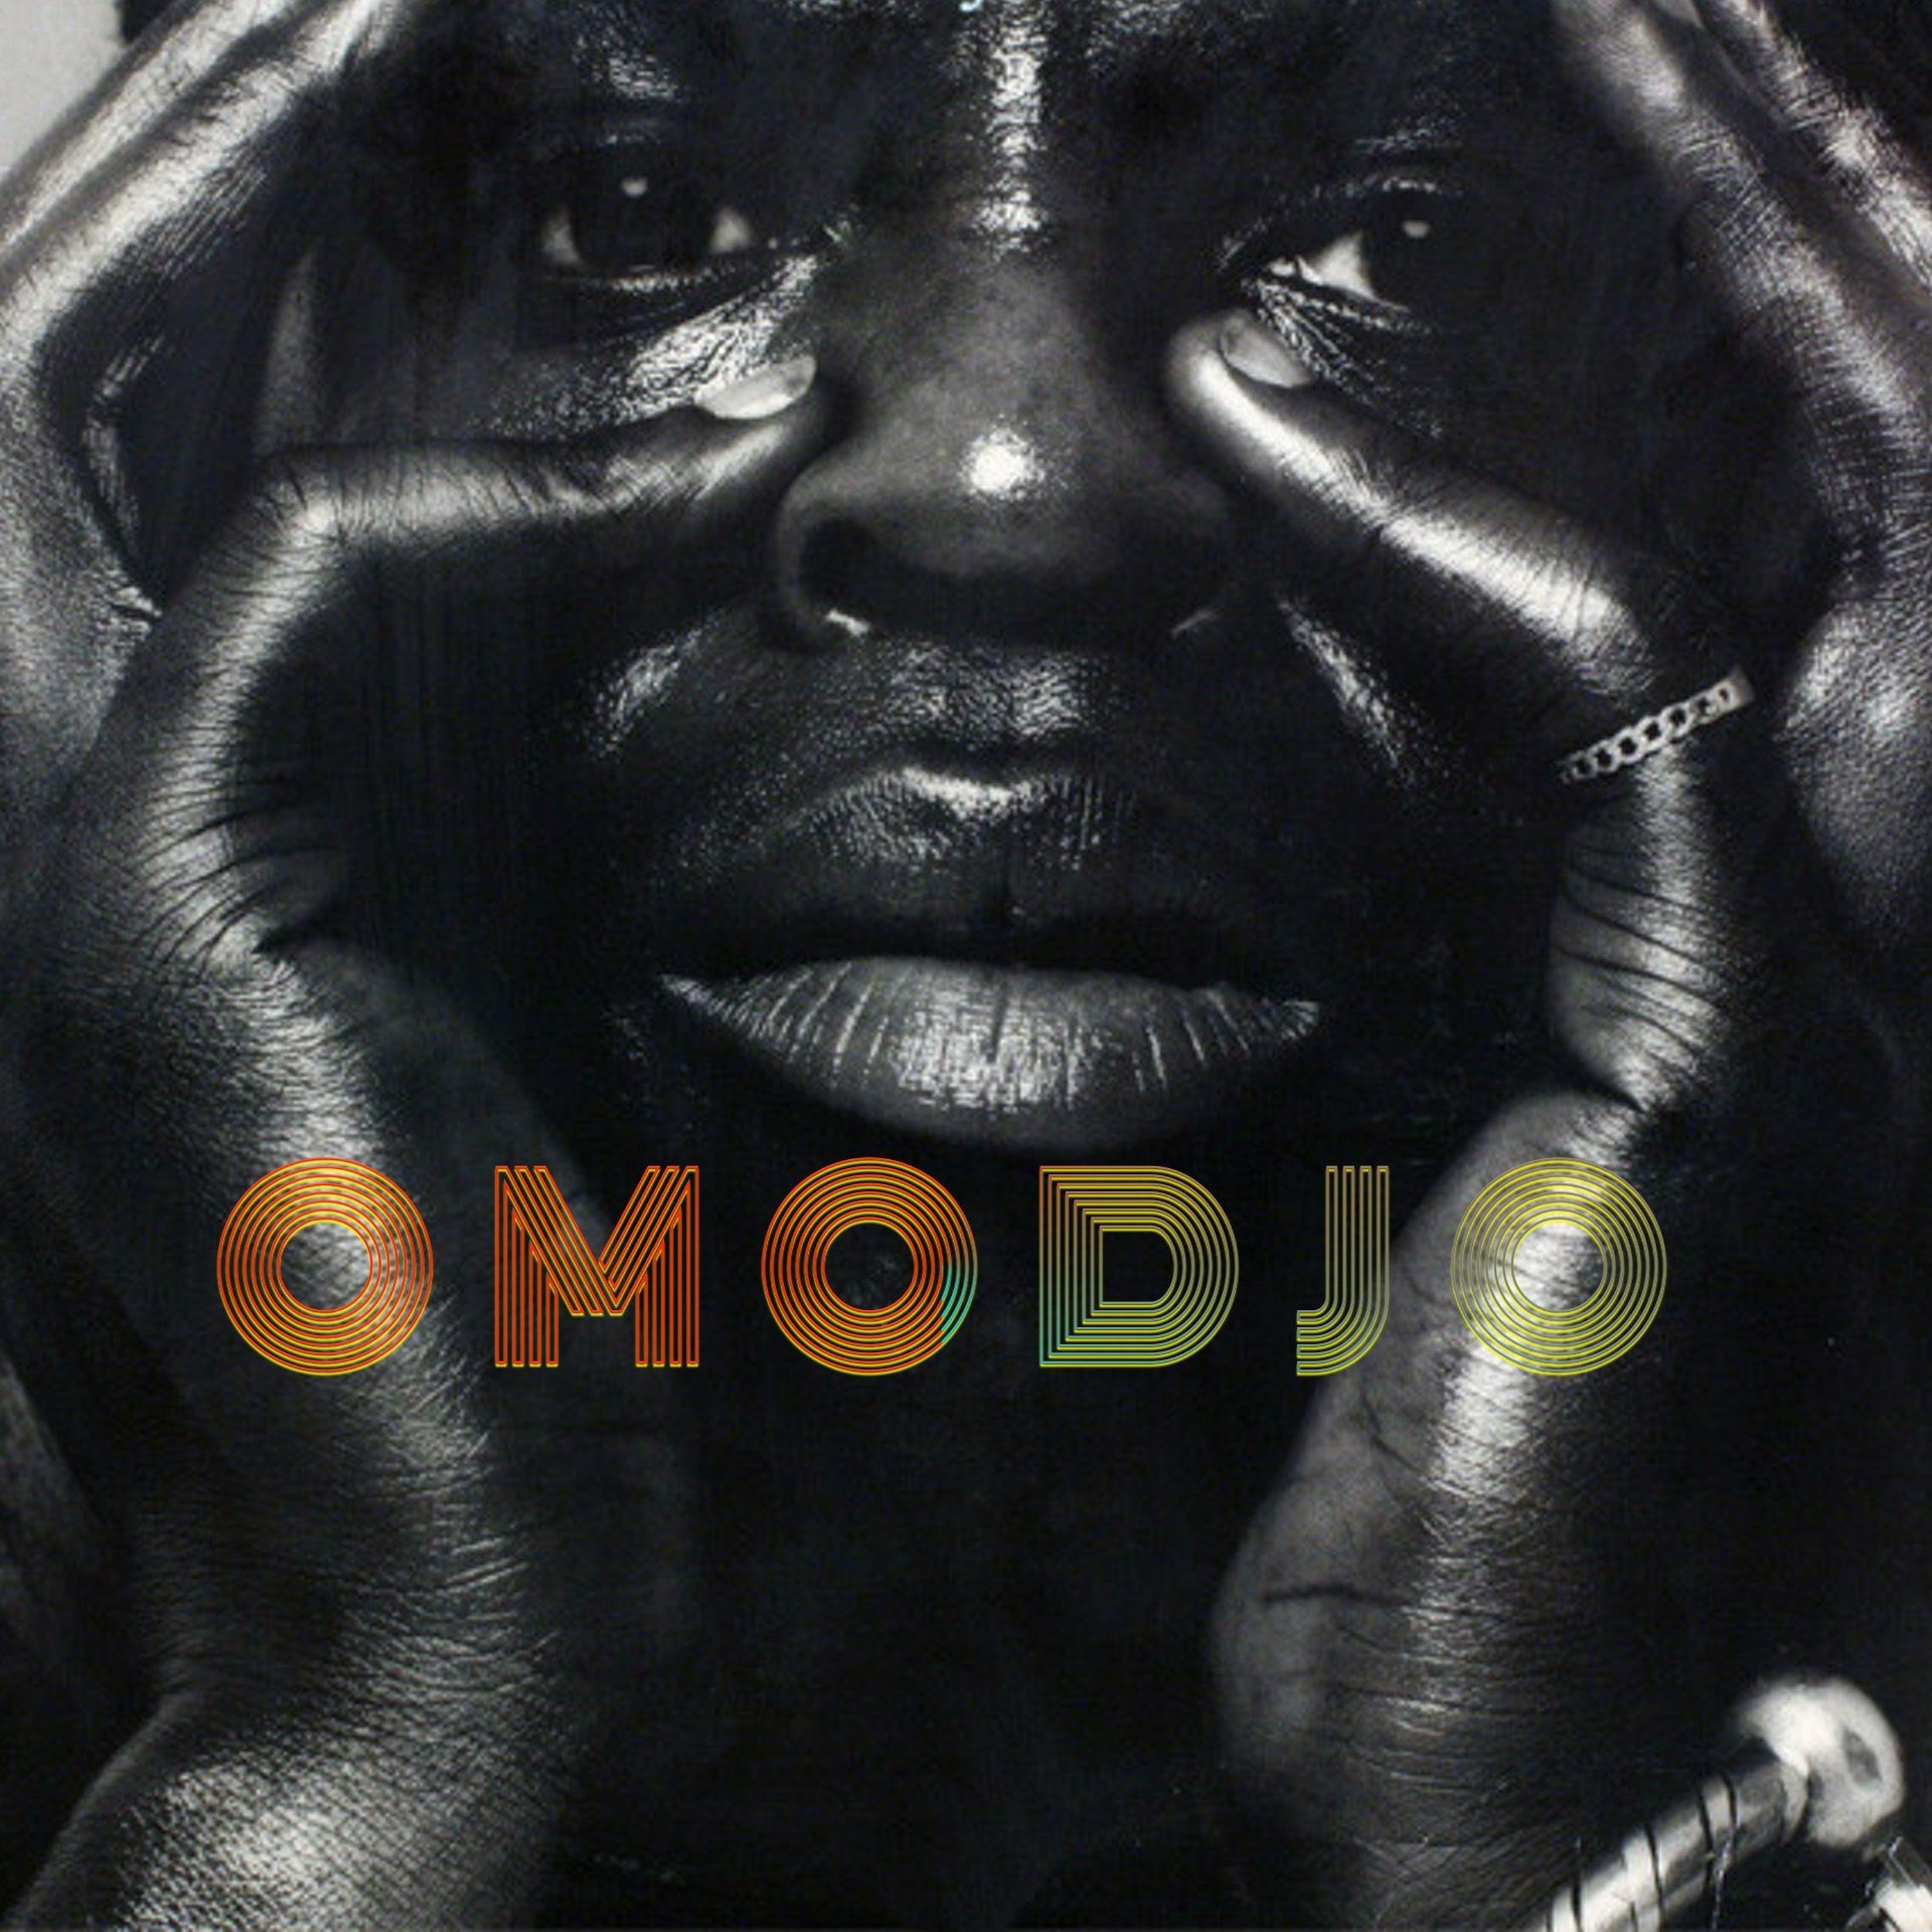 PLAYLIST - PLAY ! OMODJO avril 2020 - continuous mix